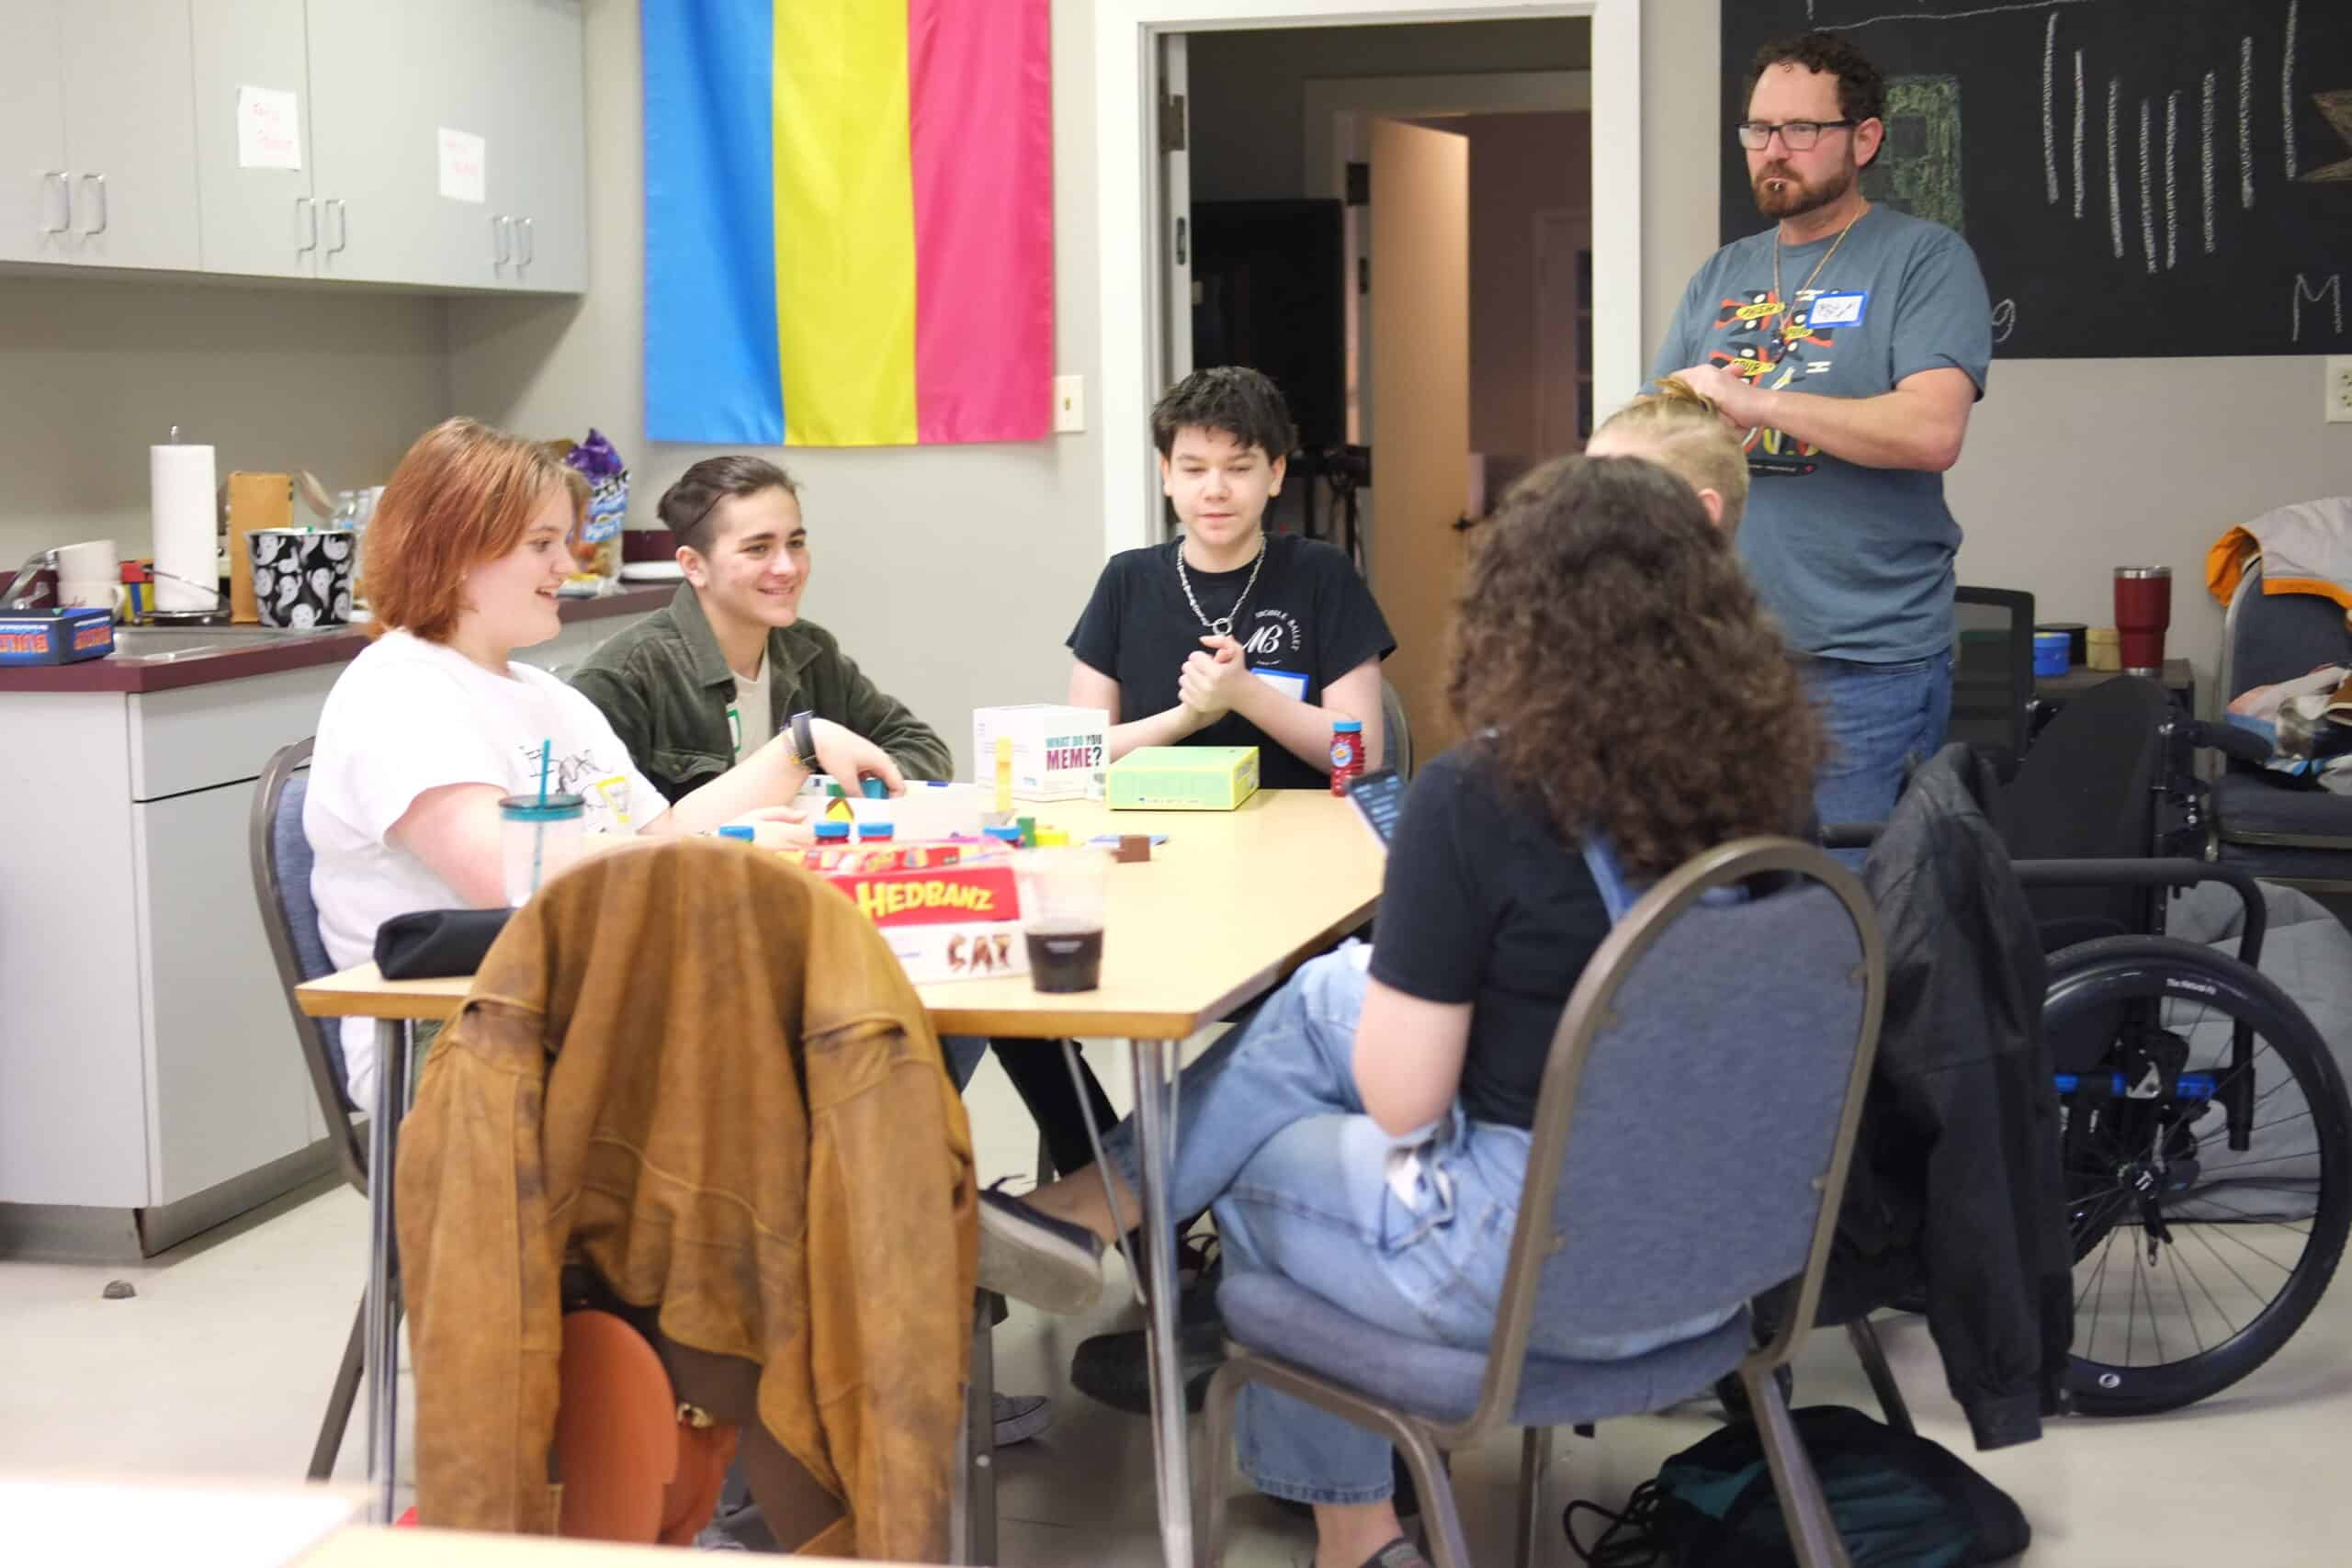 Group of individuals sitting around a table interacting, with games visible, in a room with a pride flag on the wall.